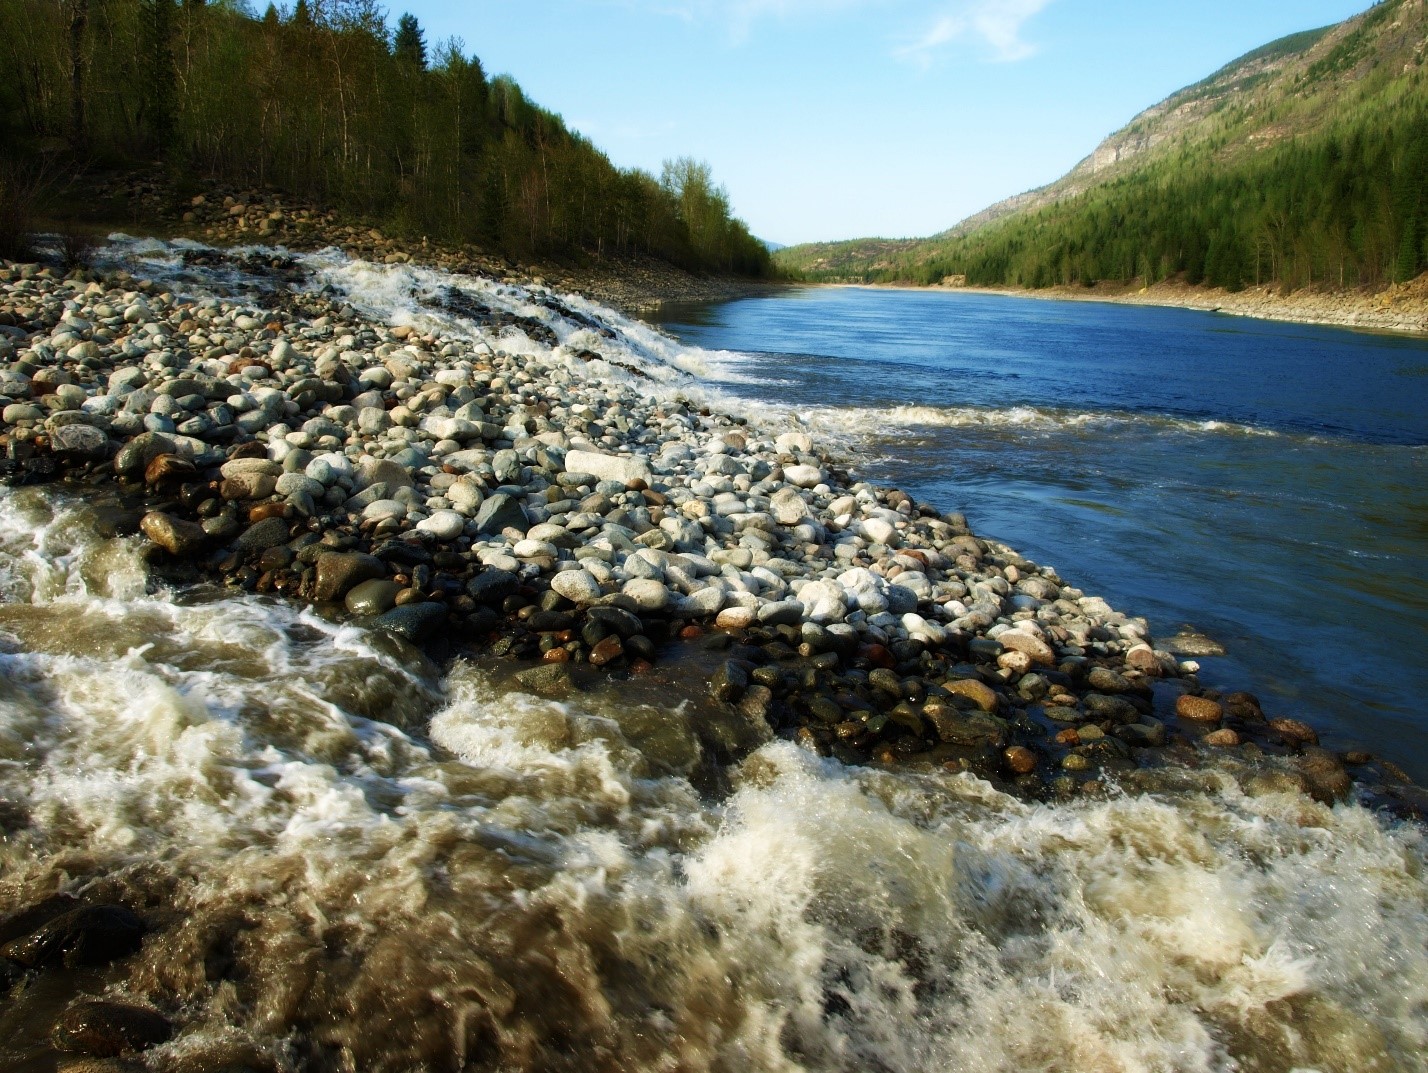 The spring freshet typically brings snowmelt into major river systems such as the Columbia River, which receives water from the pictured Murphy Creek in British Columbia. But climate change could reduce the amount of snow and how quickly it melts. Credit: urbanworkbench